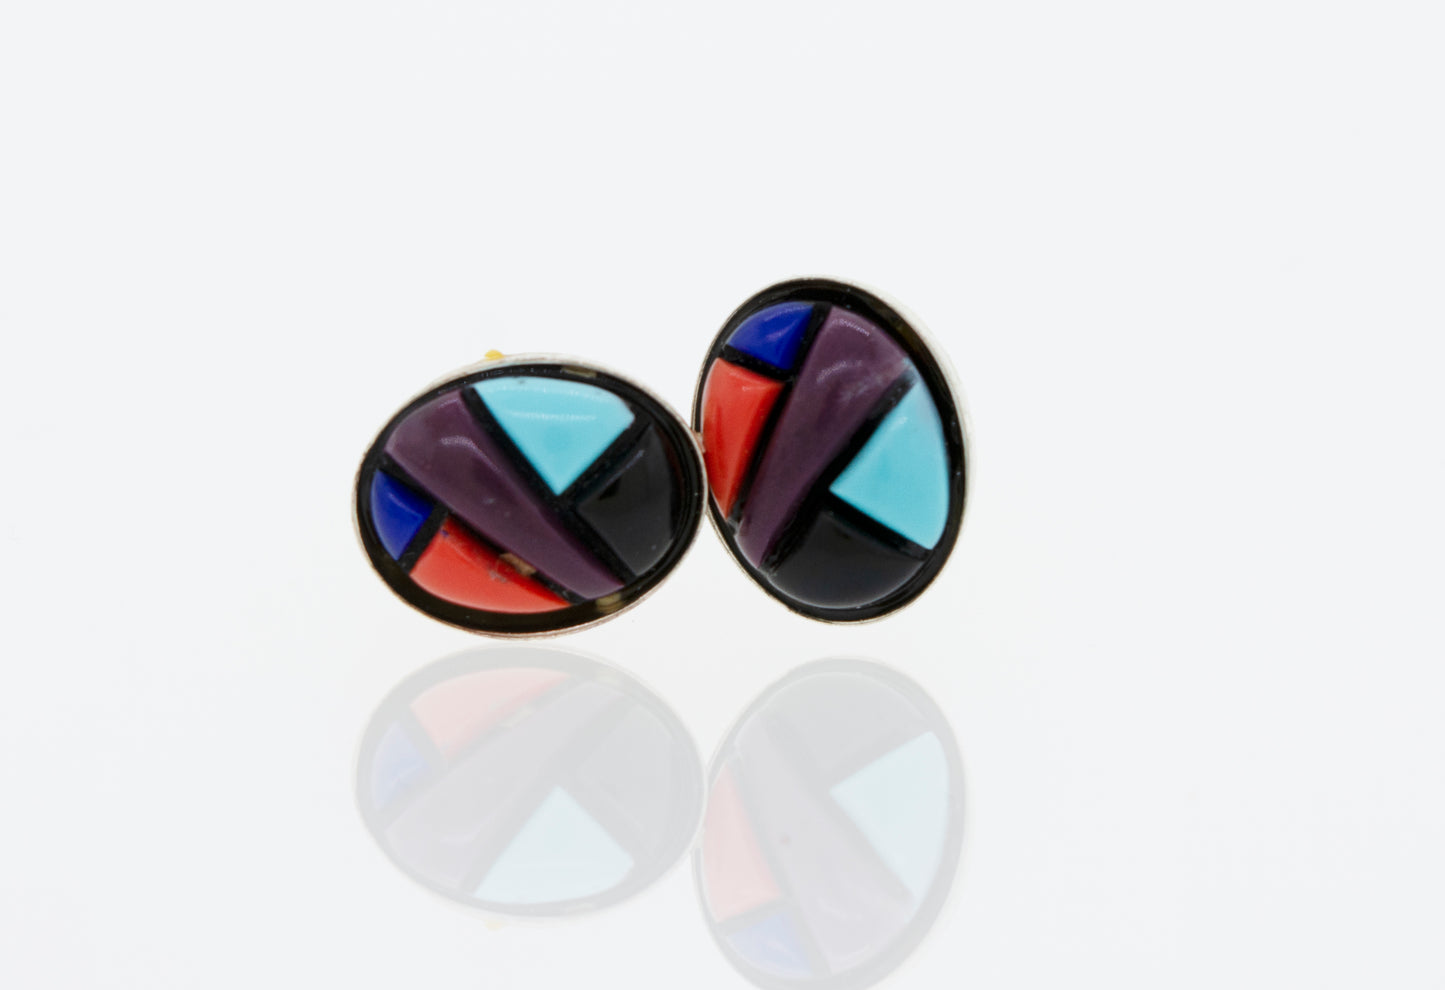 A pair of Super Silver American Made Multi-Stone Oval Shape Stud Earrings on a white surface.